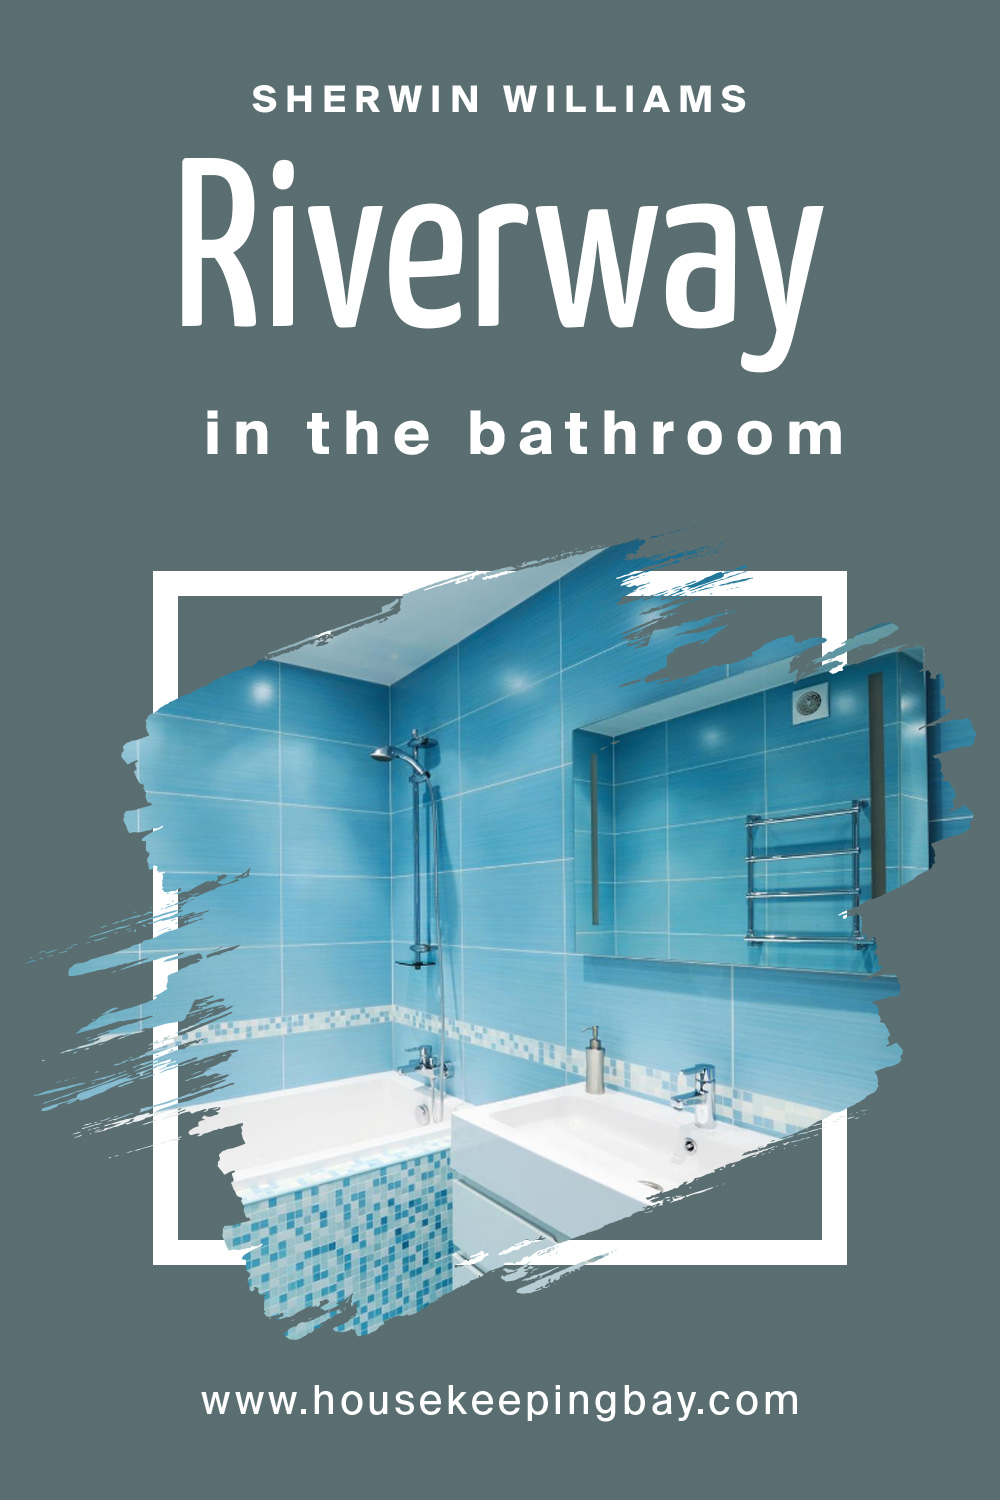 riverway by sherwin williams in the bathroom